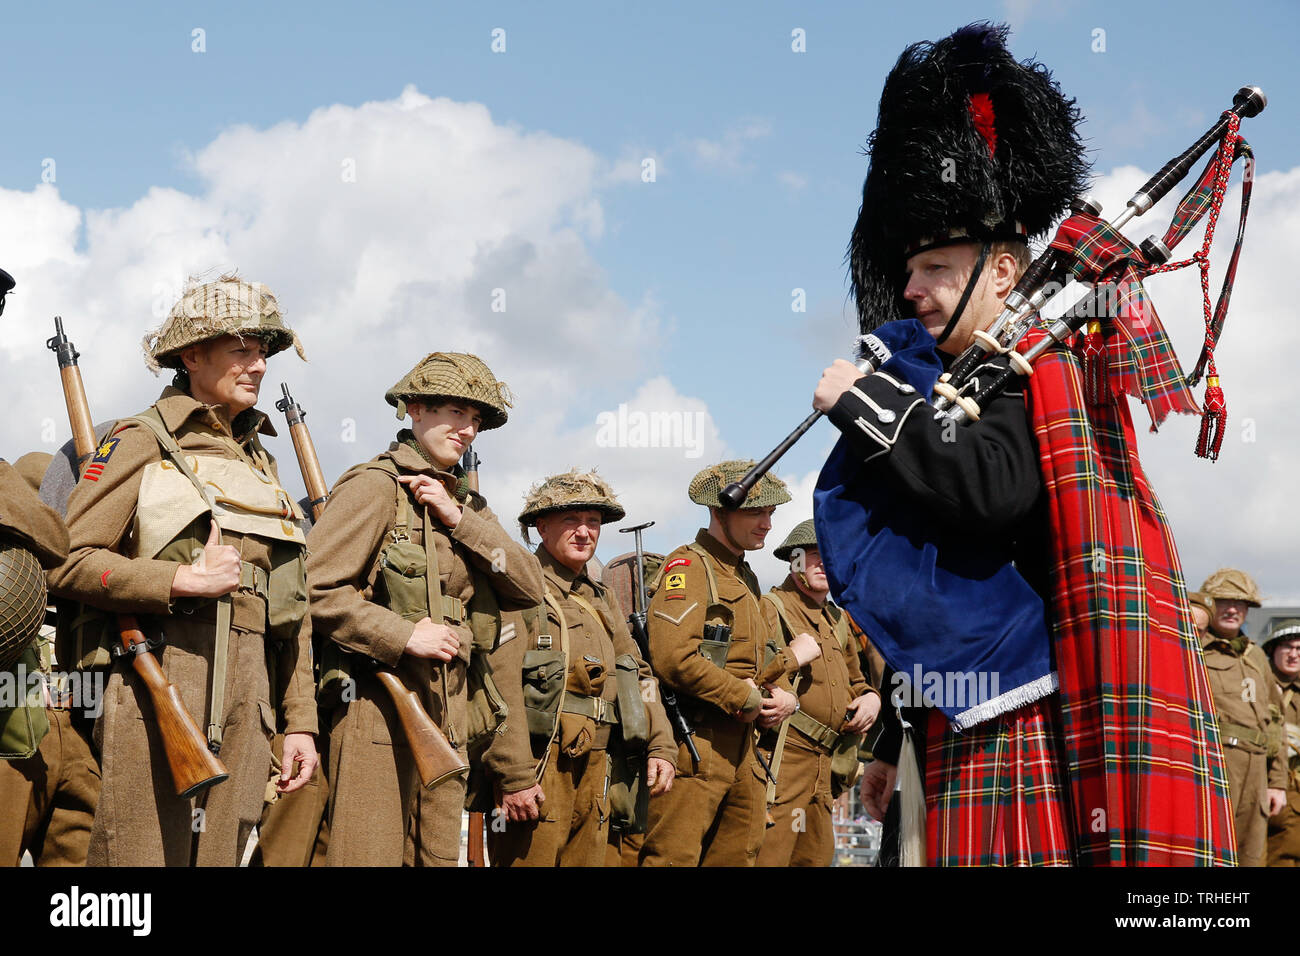 Portsmouth, UK. 6th June, 2019. A piper plays as World War II re-enactors walk the original route the d-day soldiers took through Portsmouth to the landing craft, at South Parade Pier in Southsea, Portmsouth Thursday June 6, 2019. D-day commemorations marking the 75th anniversary of the d-day landings take place this week in the UK and France Photograph : Credit: Luke MacGregor/Alamy Live News Stock Photo